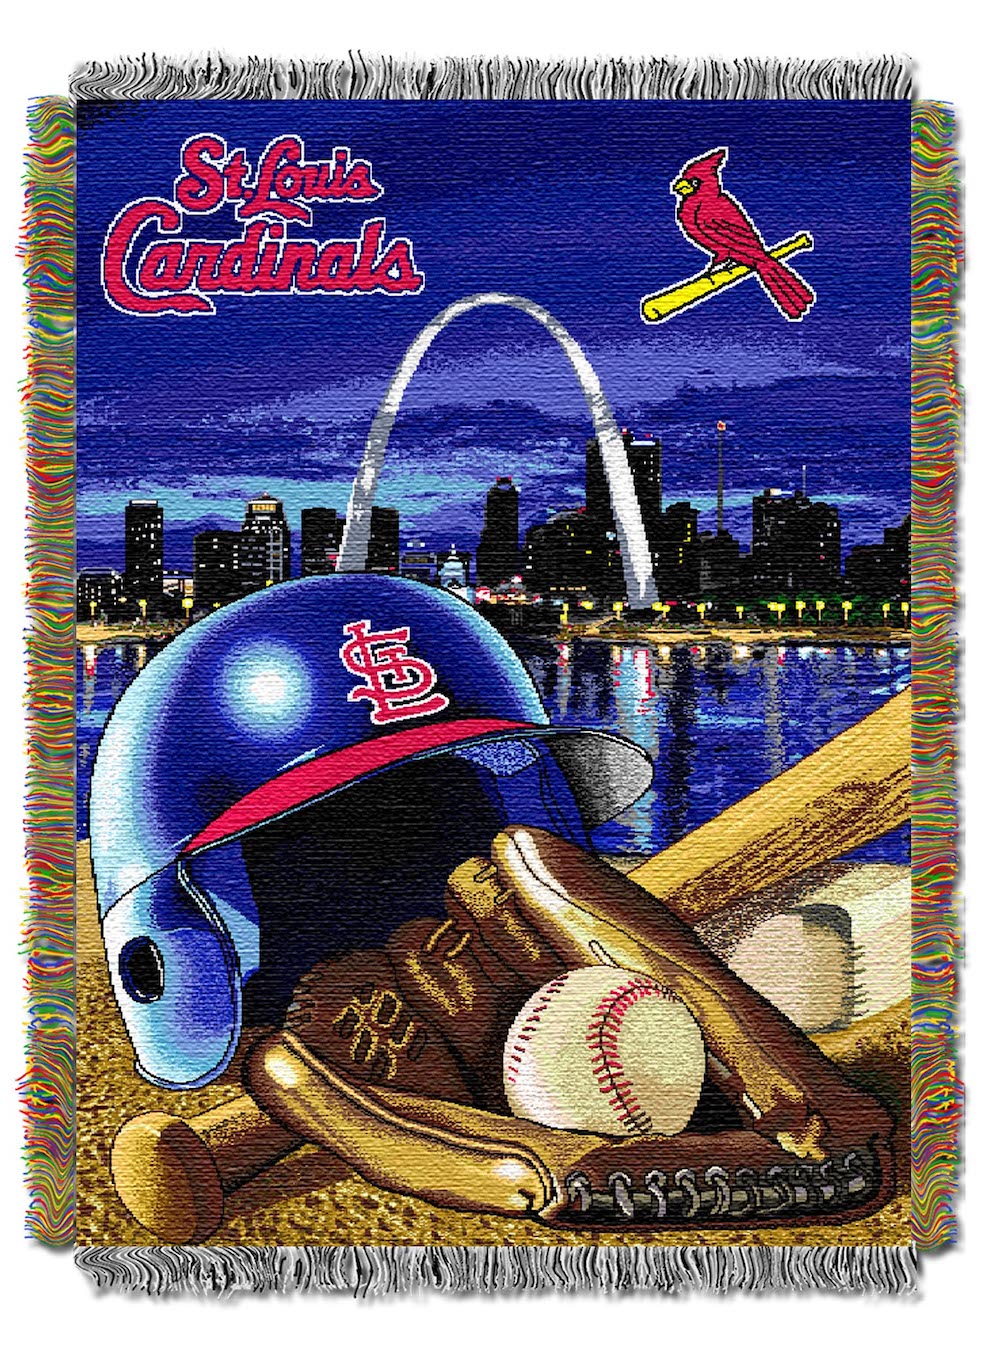 St. Louis Cardinals woven home field tapestry